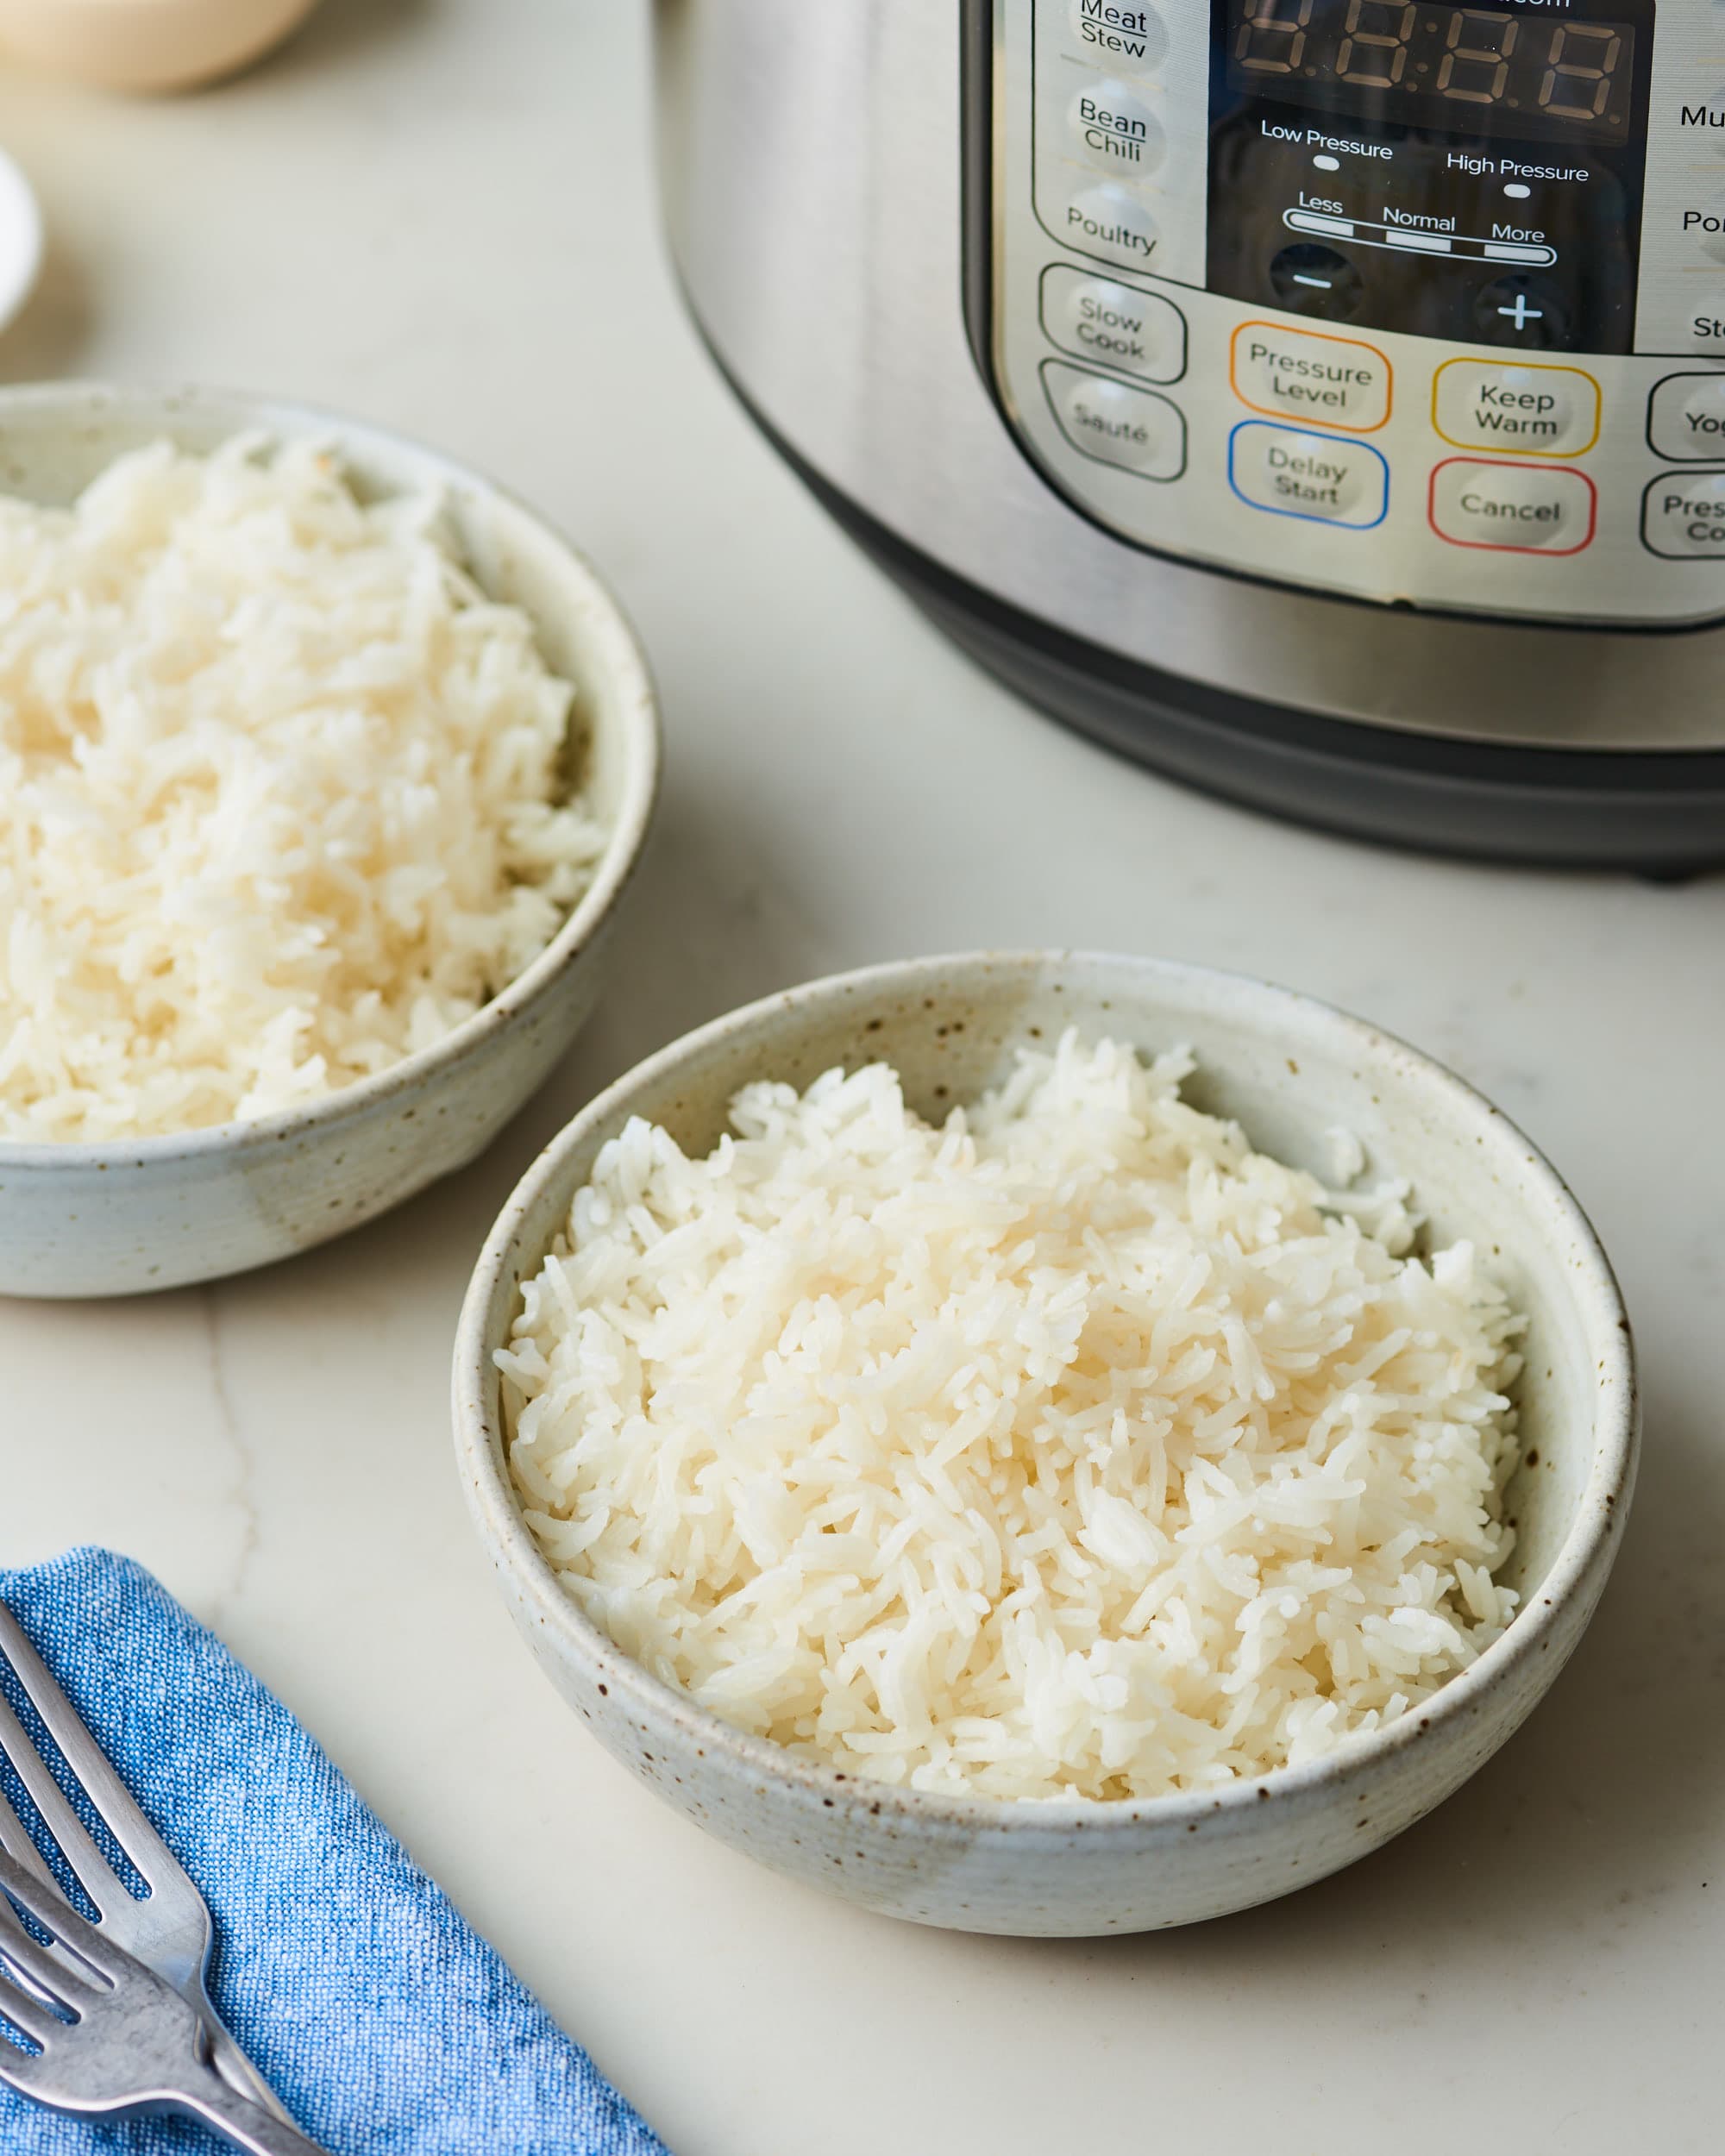 Failproof Instant Pot Rice Green Healthy Cooking